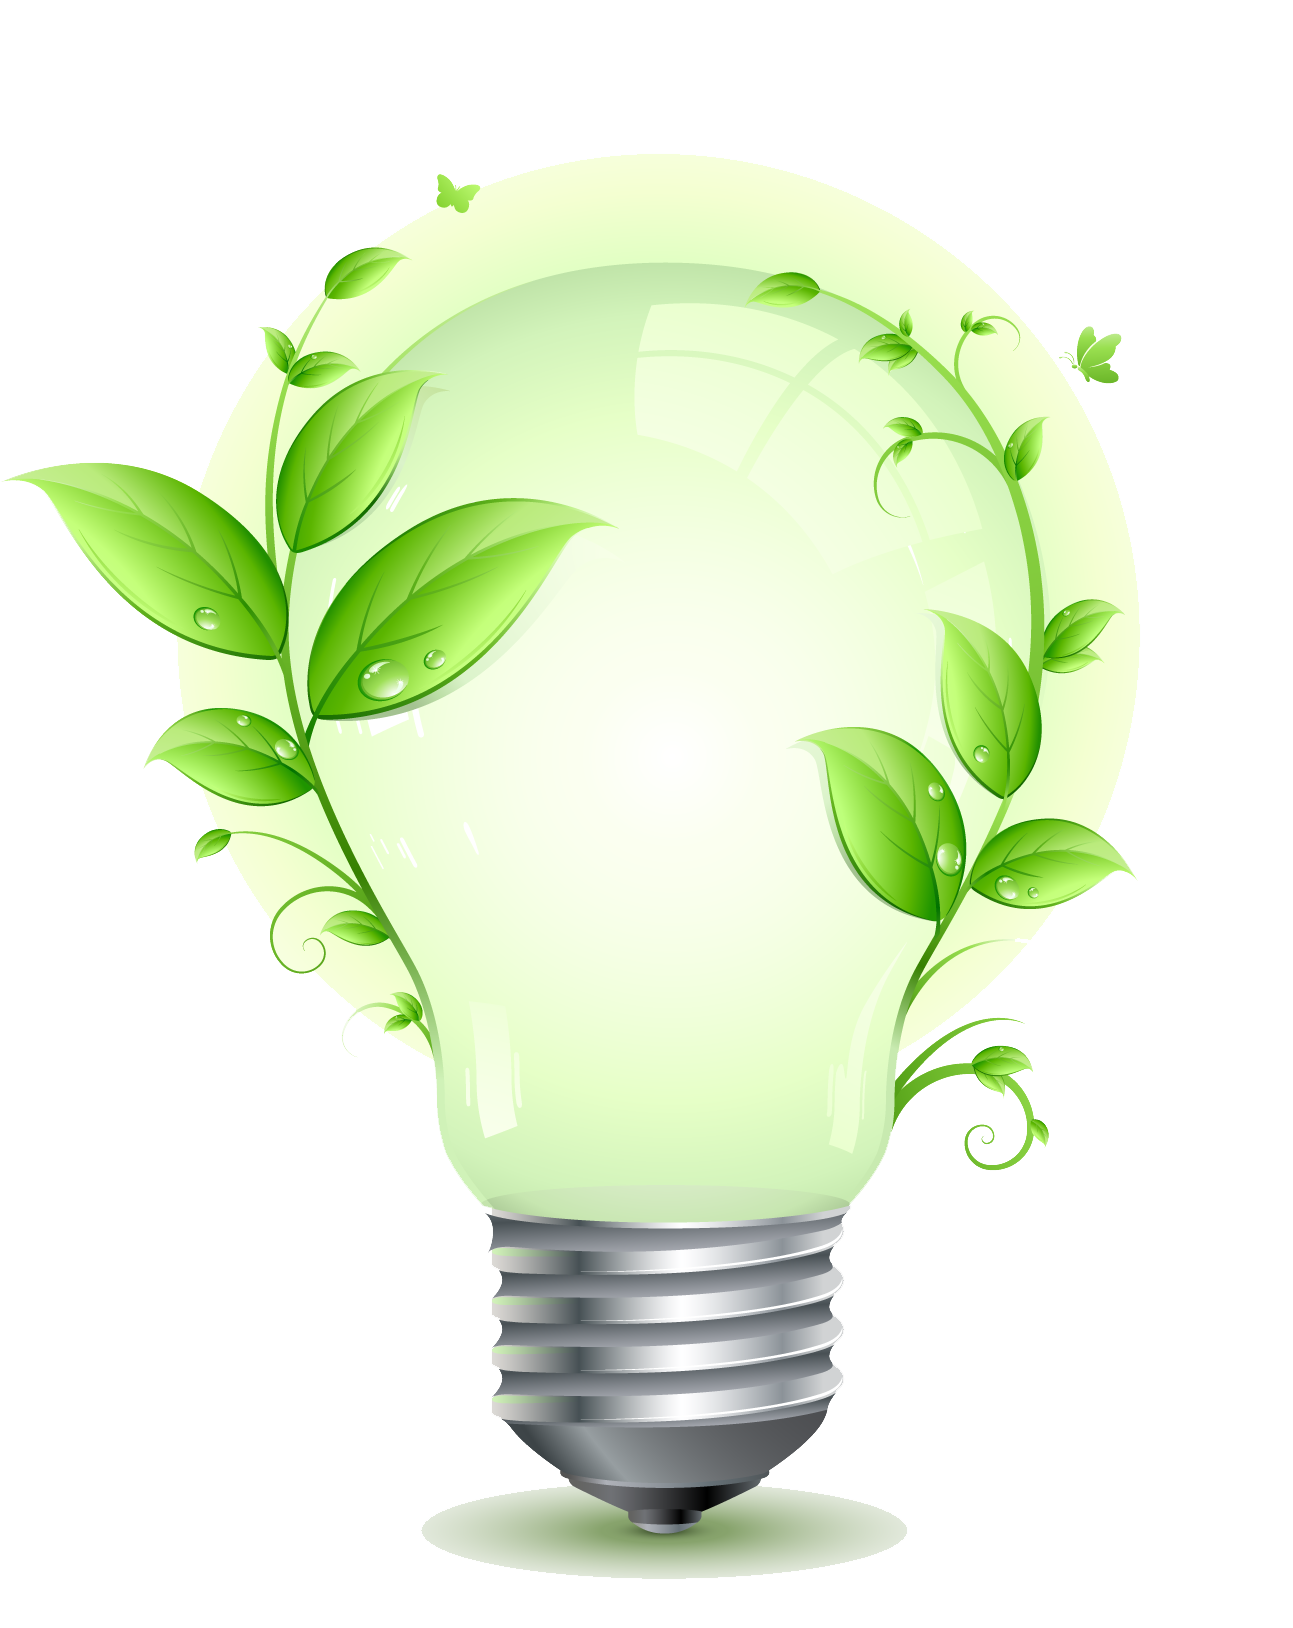 Save Electricity Image PNG Image